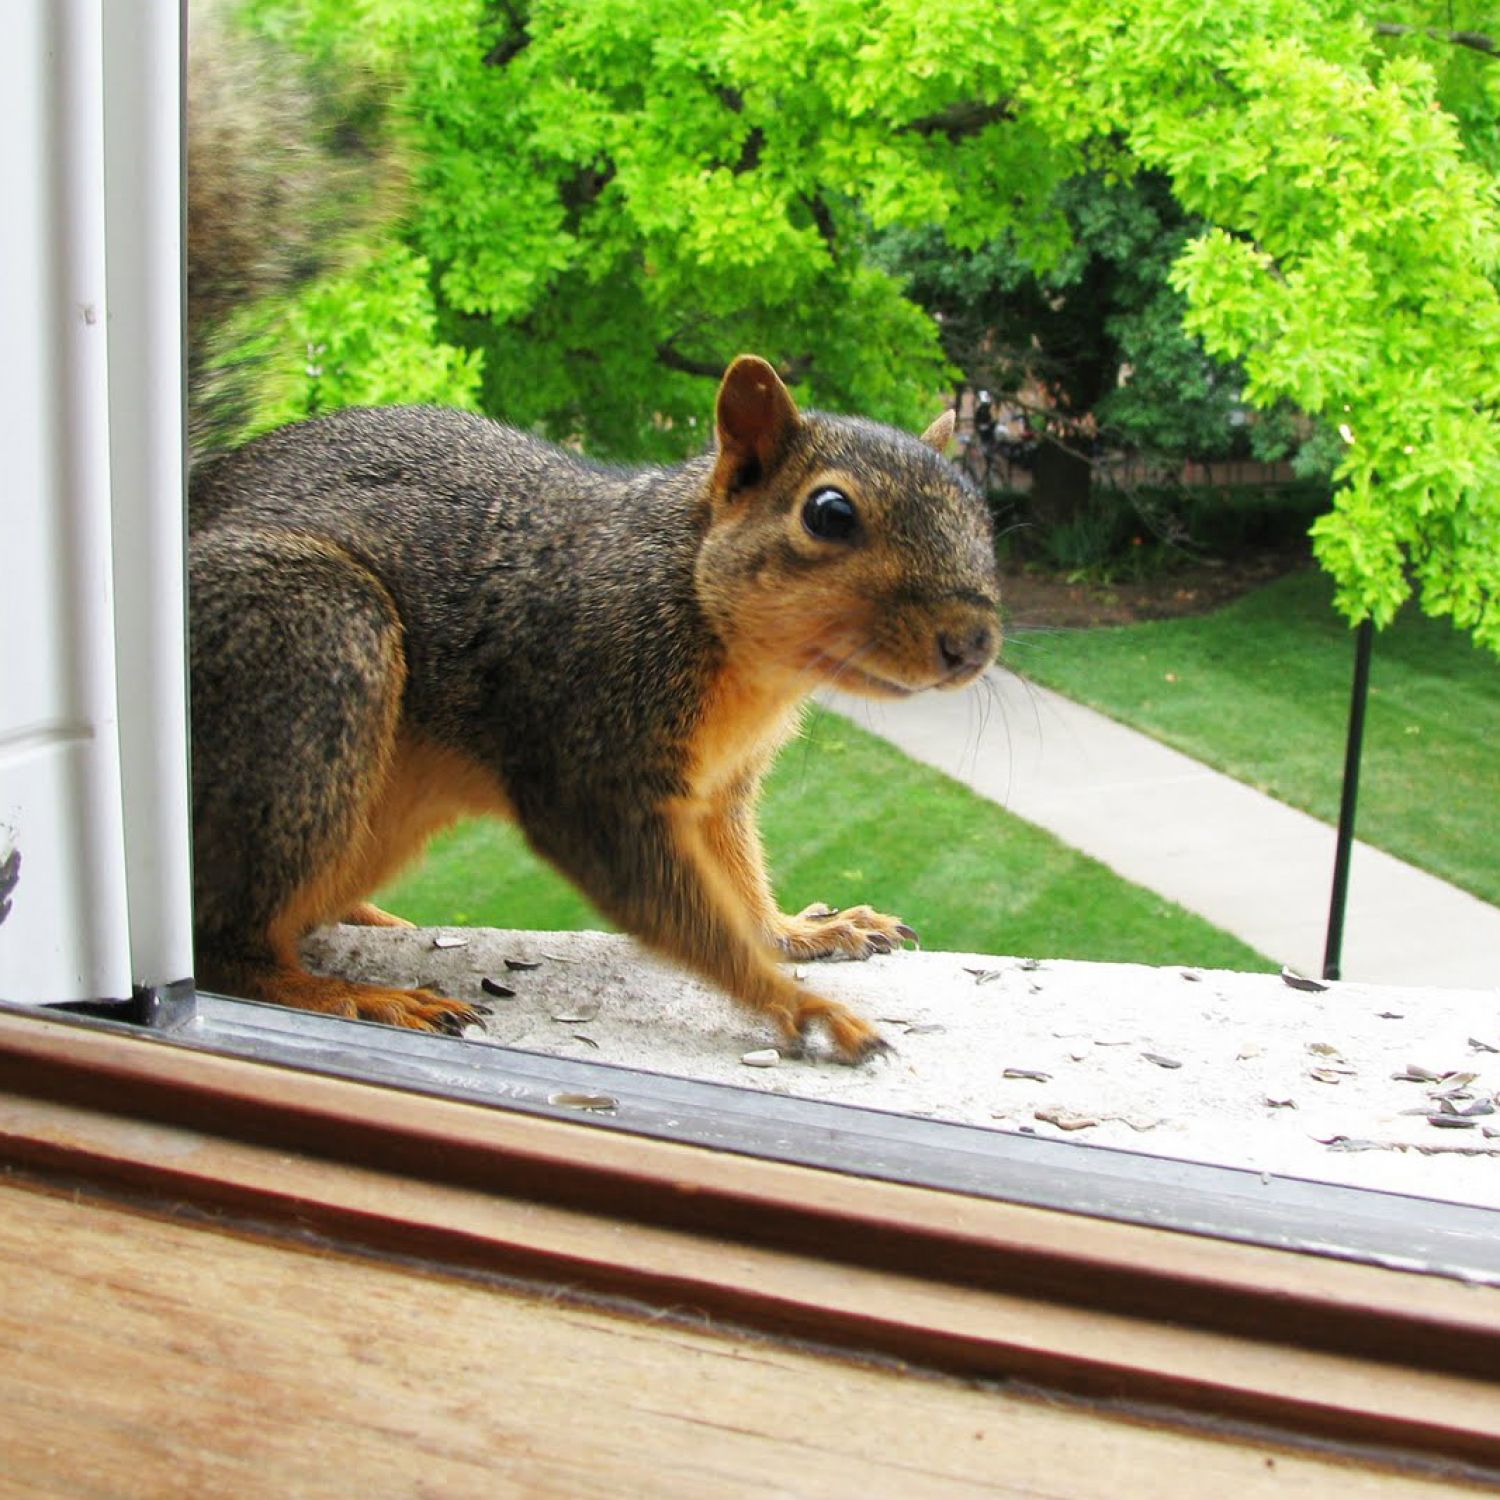 Squirrel at a home's window | Squirrel removal tips